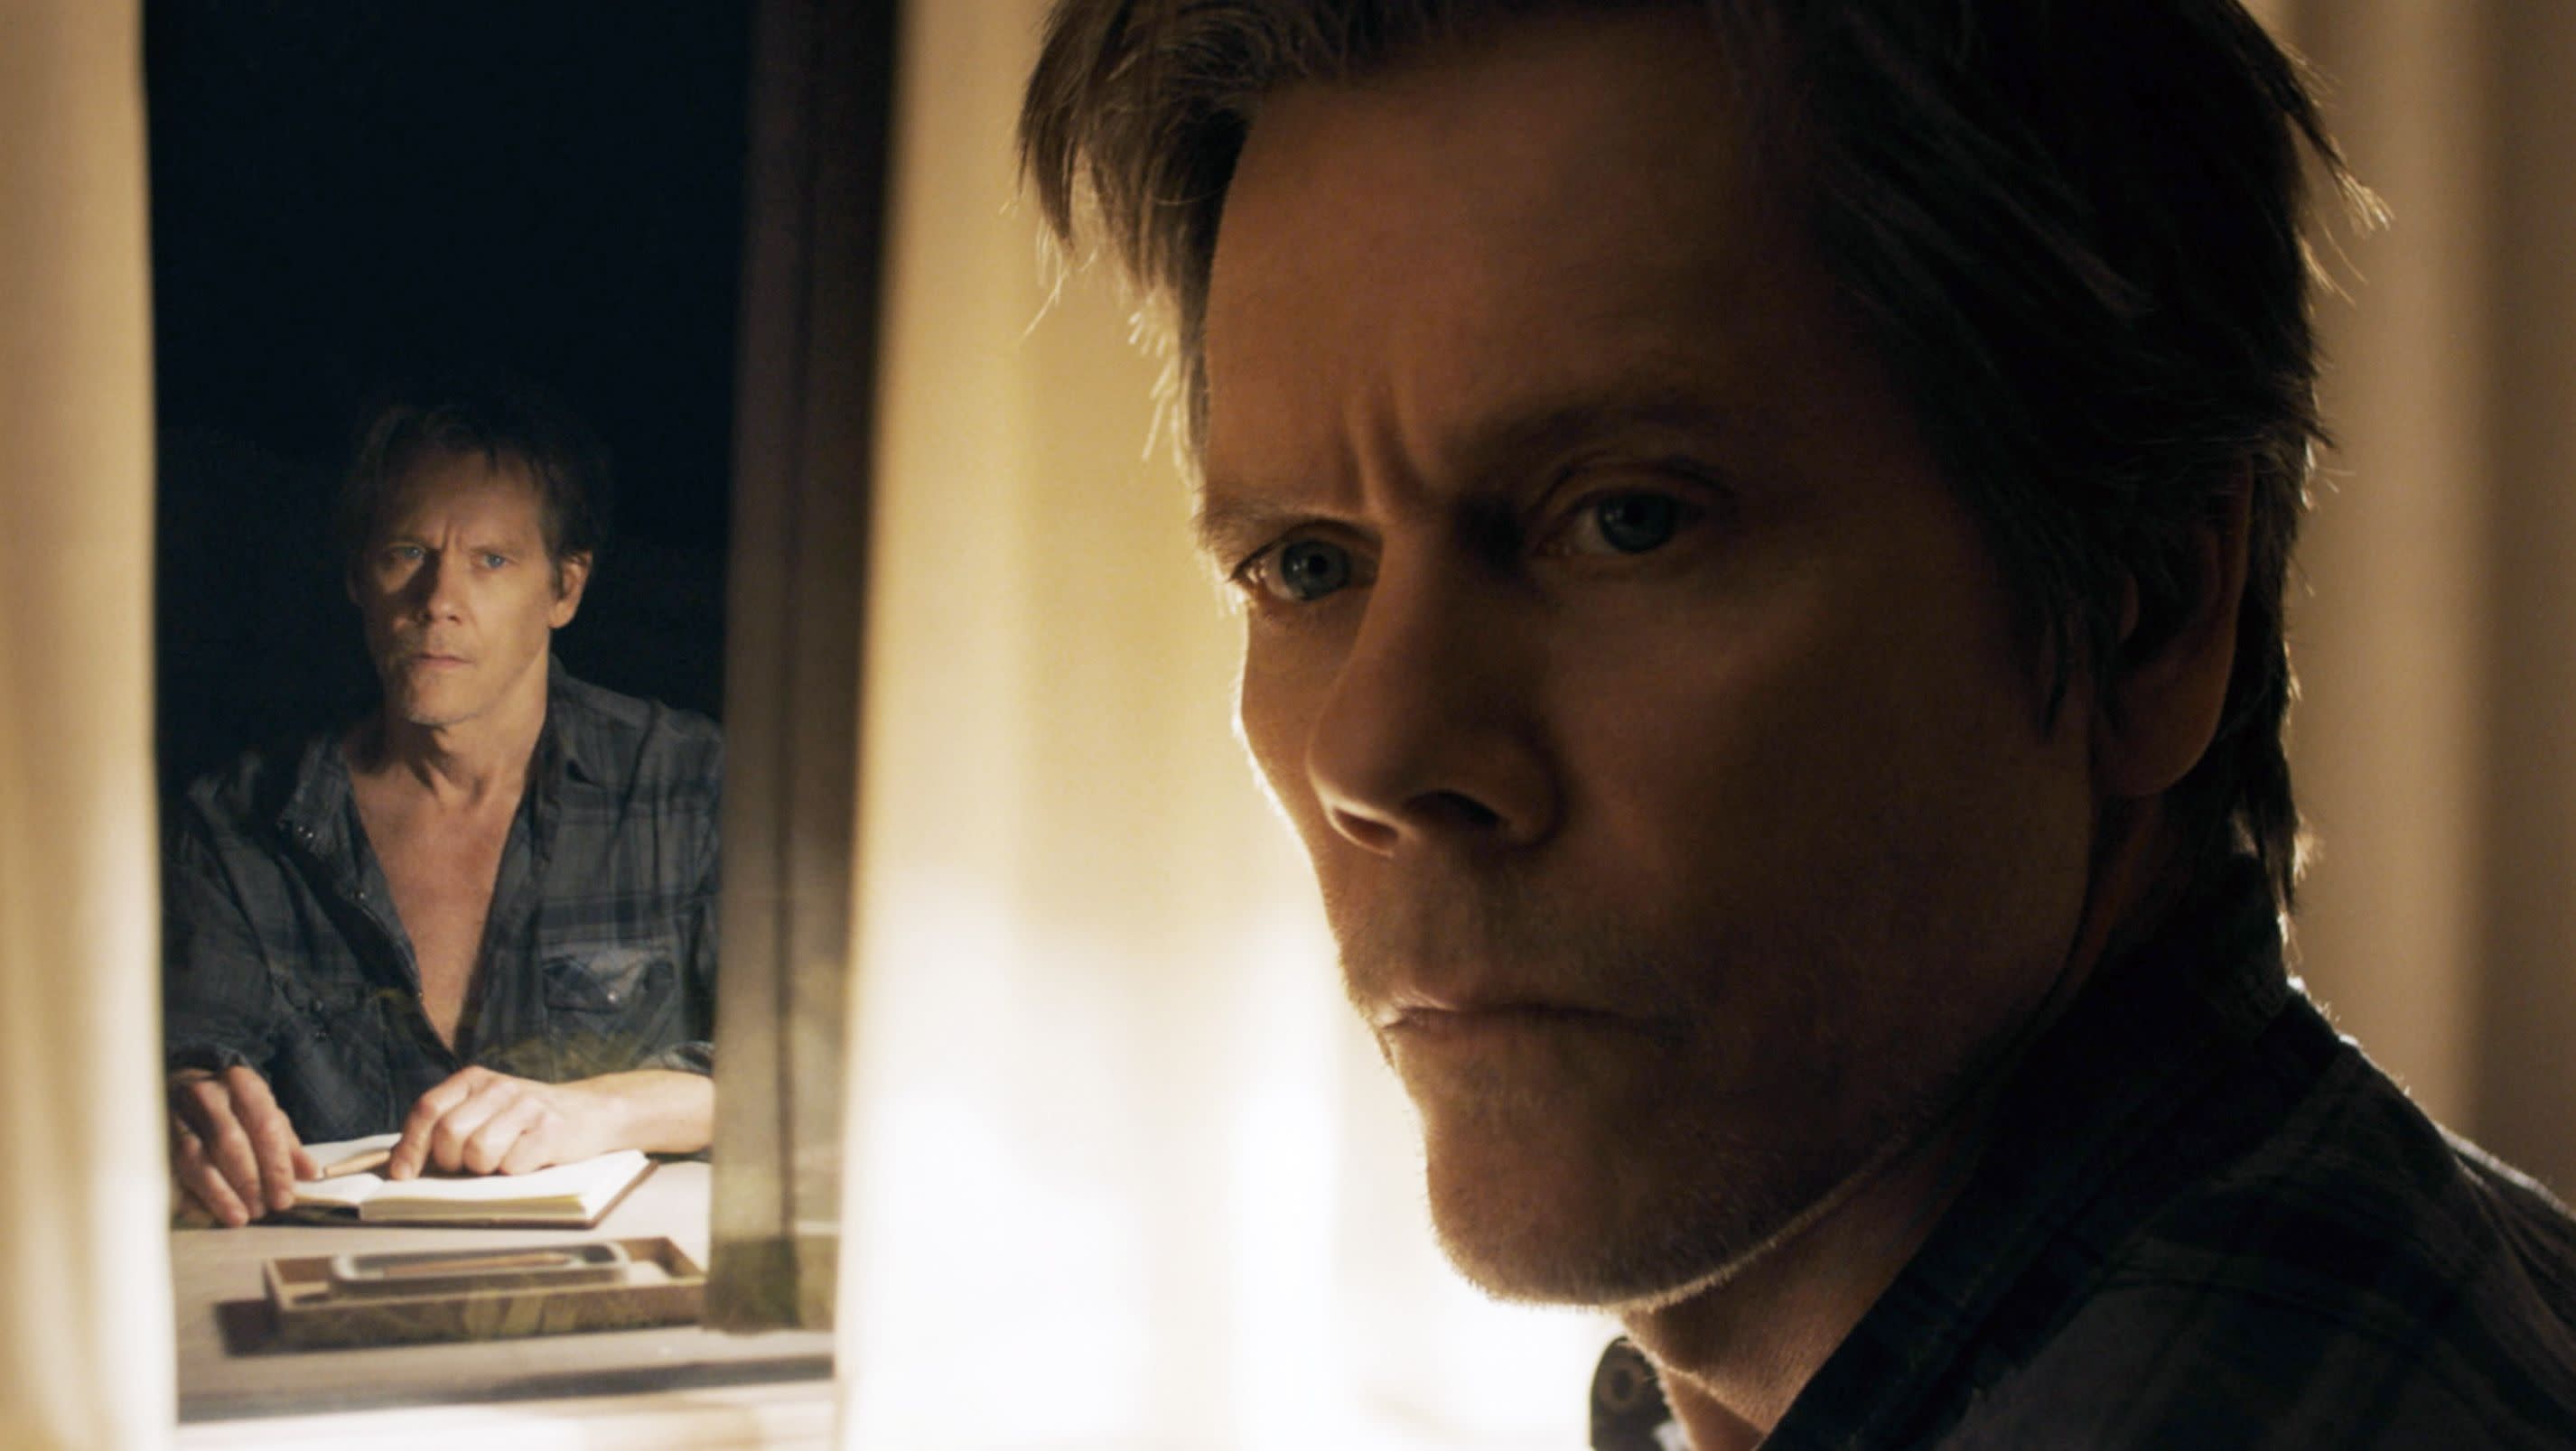 Kevin Bacon on 'You Should Have Left,' prepping for COVID-19 work